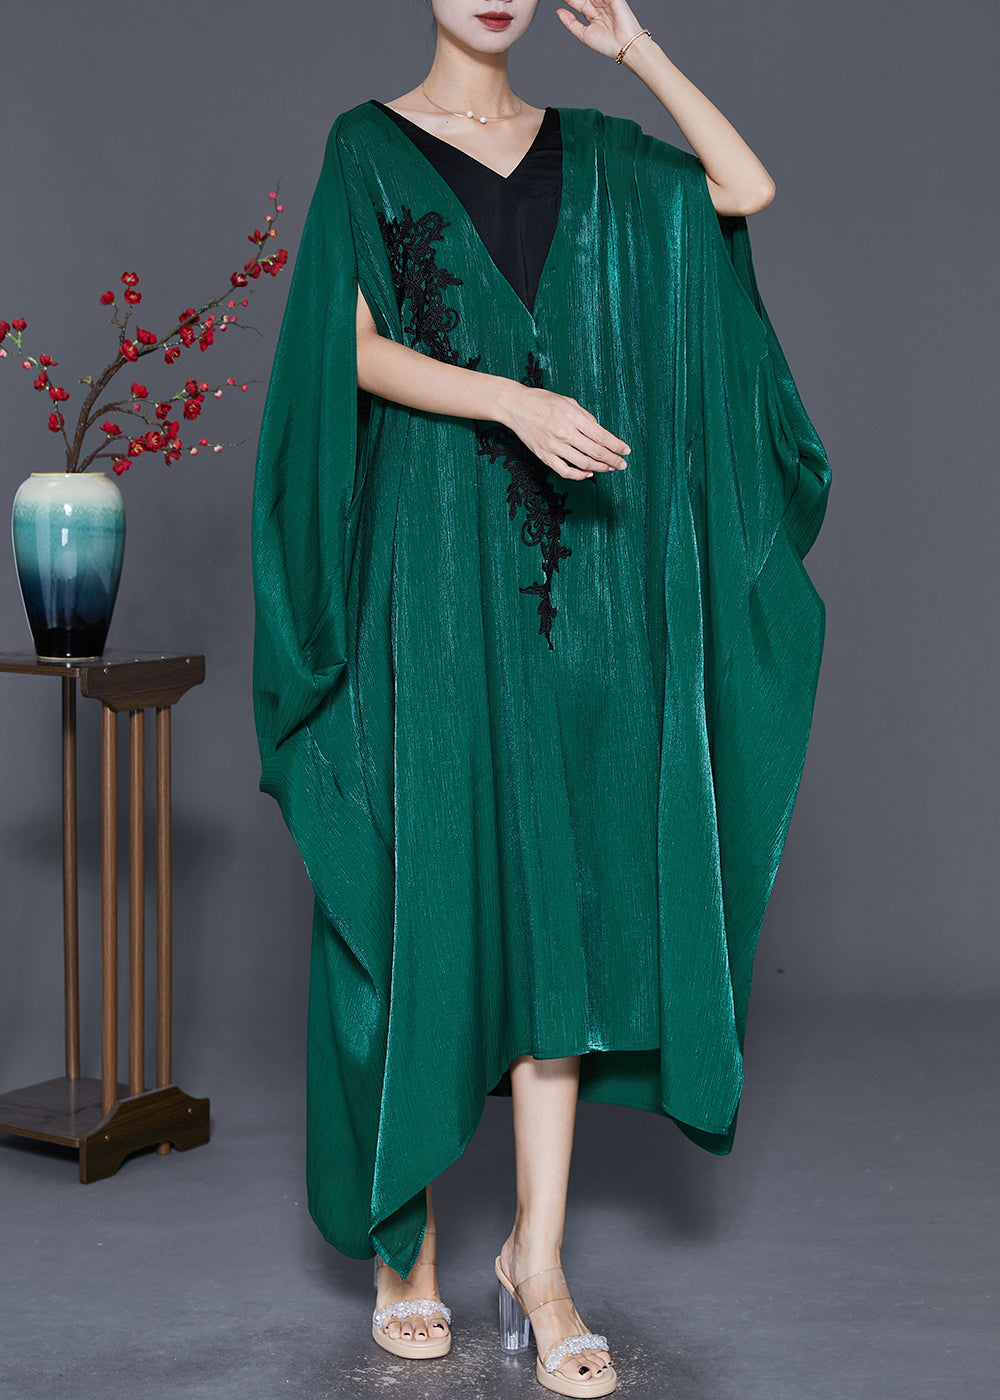 Style Blackish Green Embroideried Patchwork Silk Long Dresses Batwing Sleeve